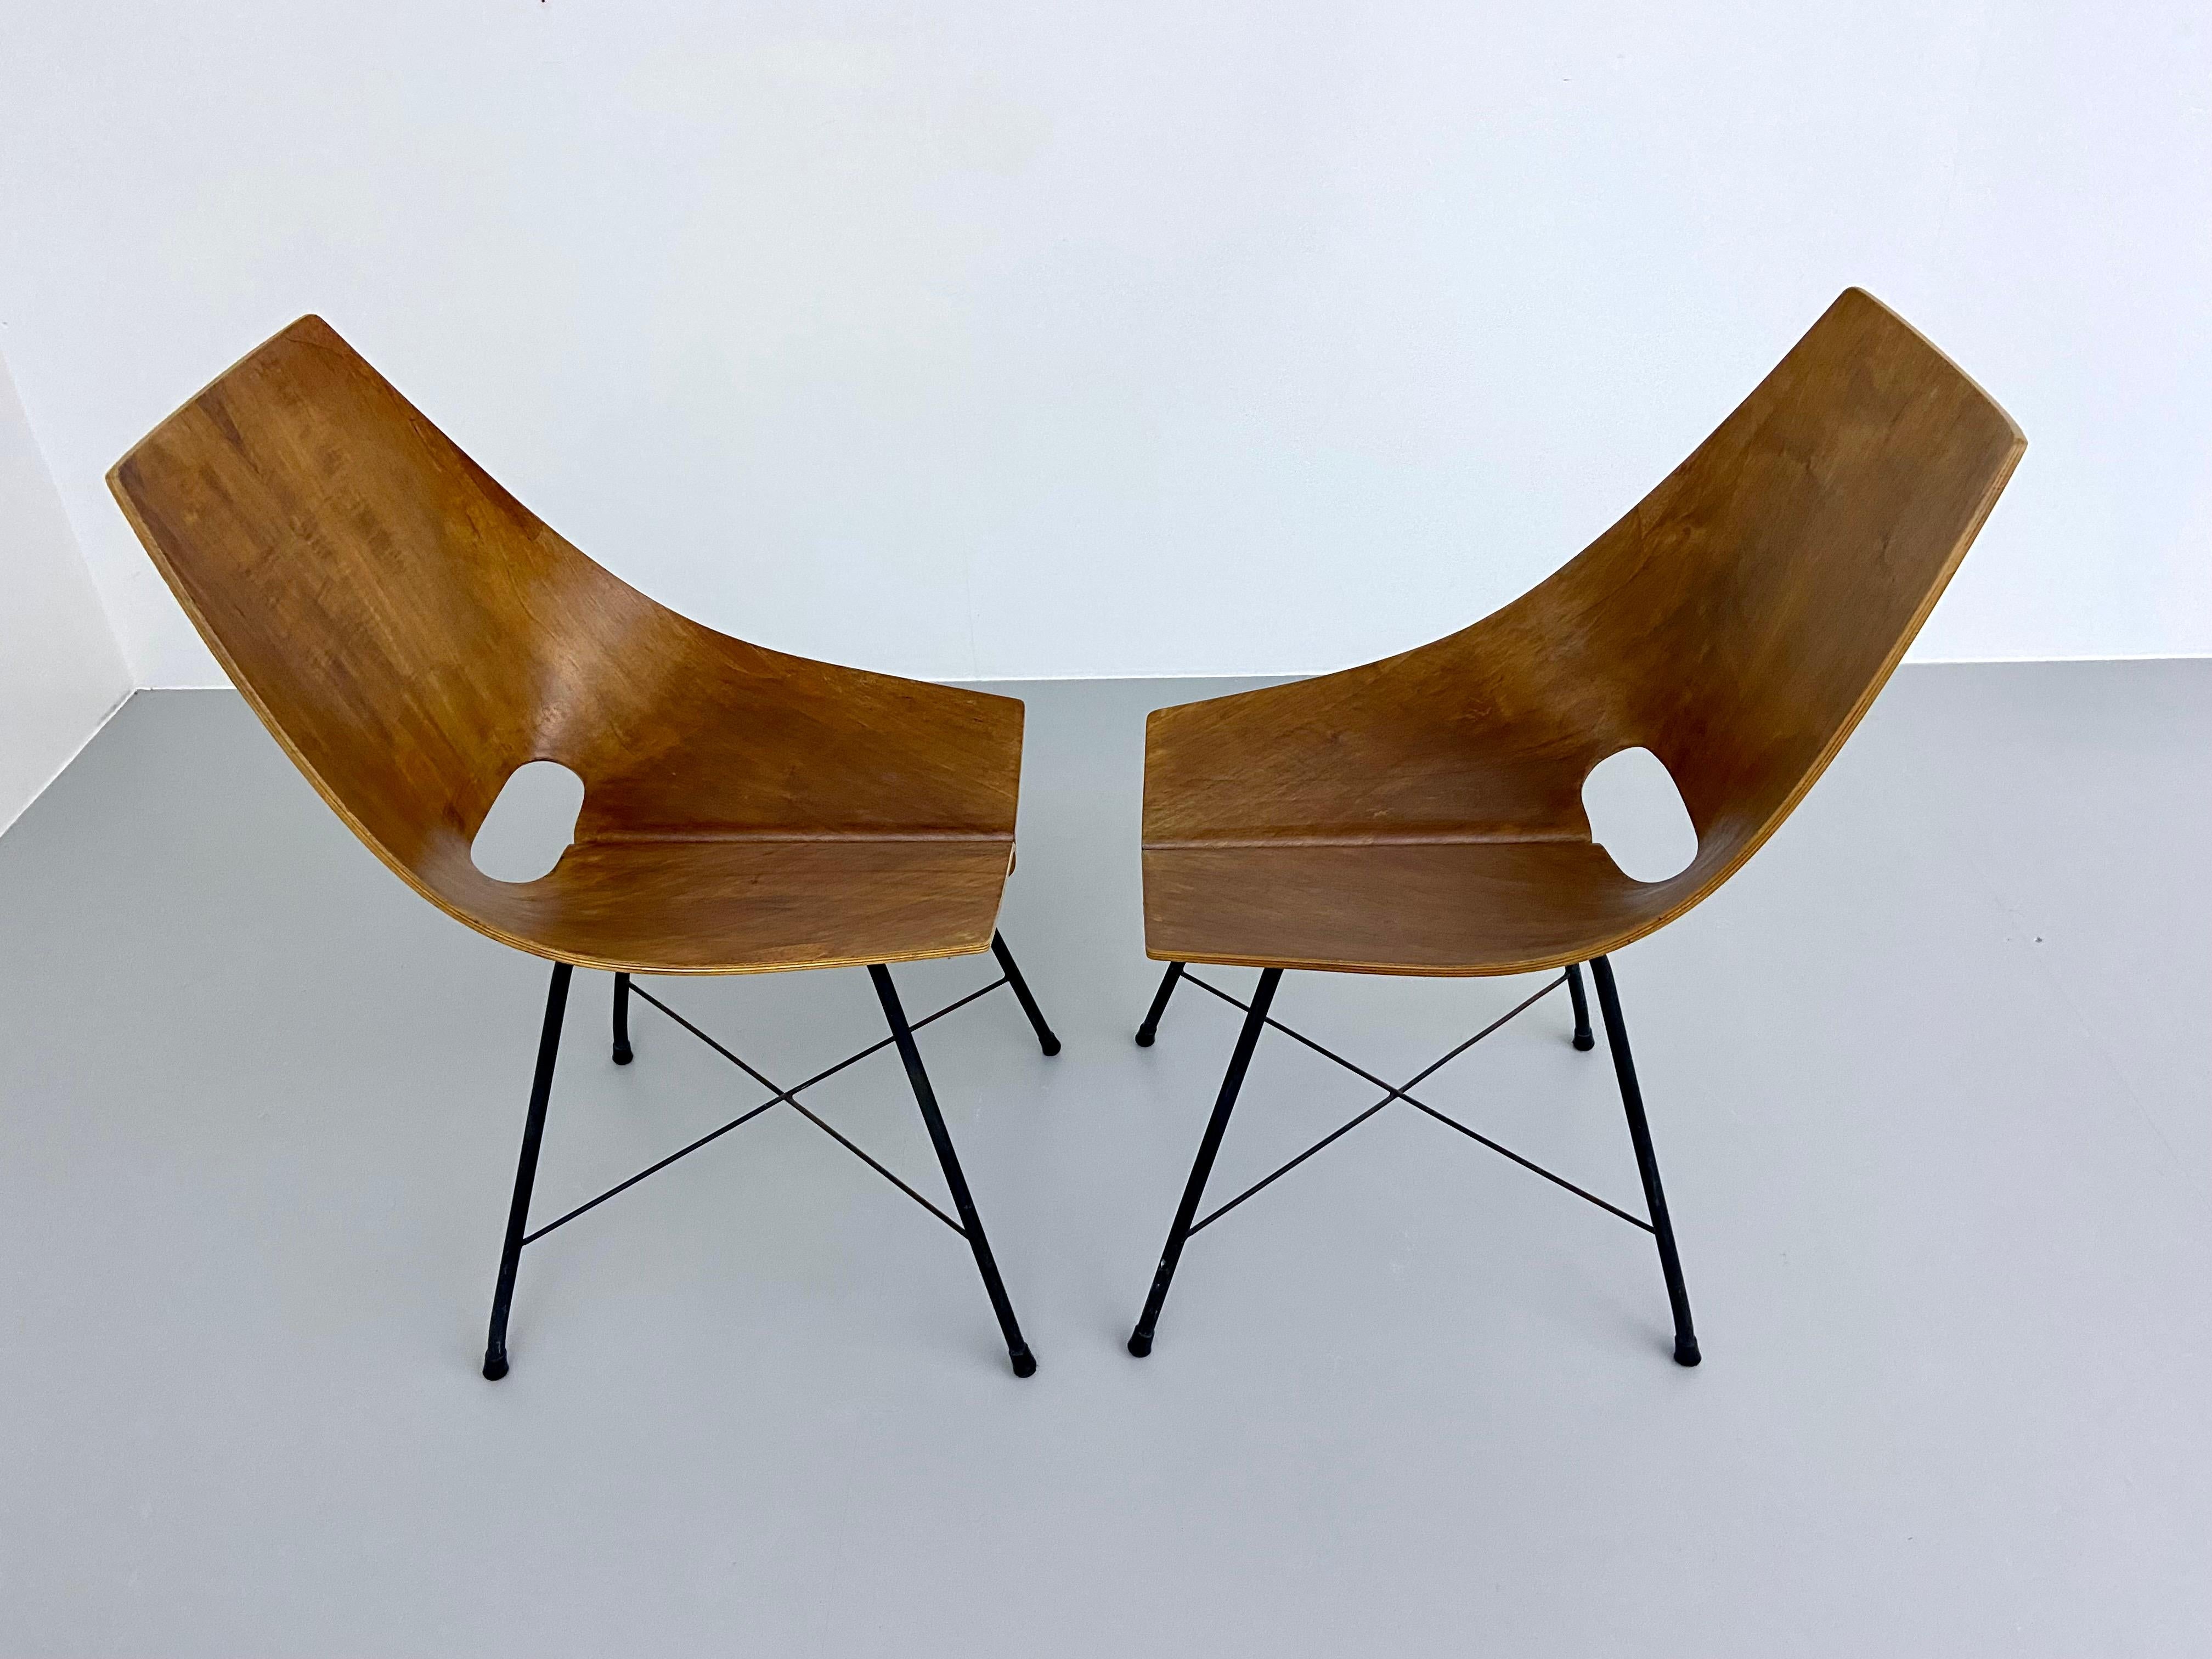 Set of 6 Dining Room Chairs by Carlo Ratti in Bended Wood and Metal, Italy, 1954 For Sale 3